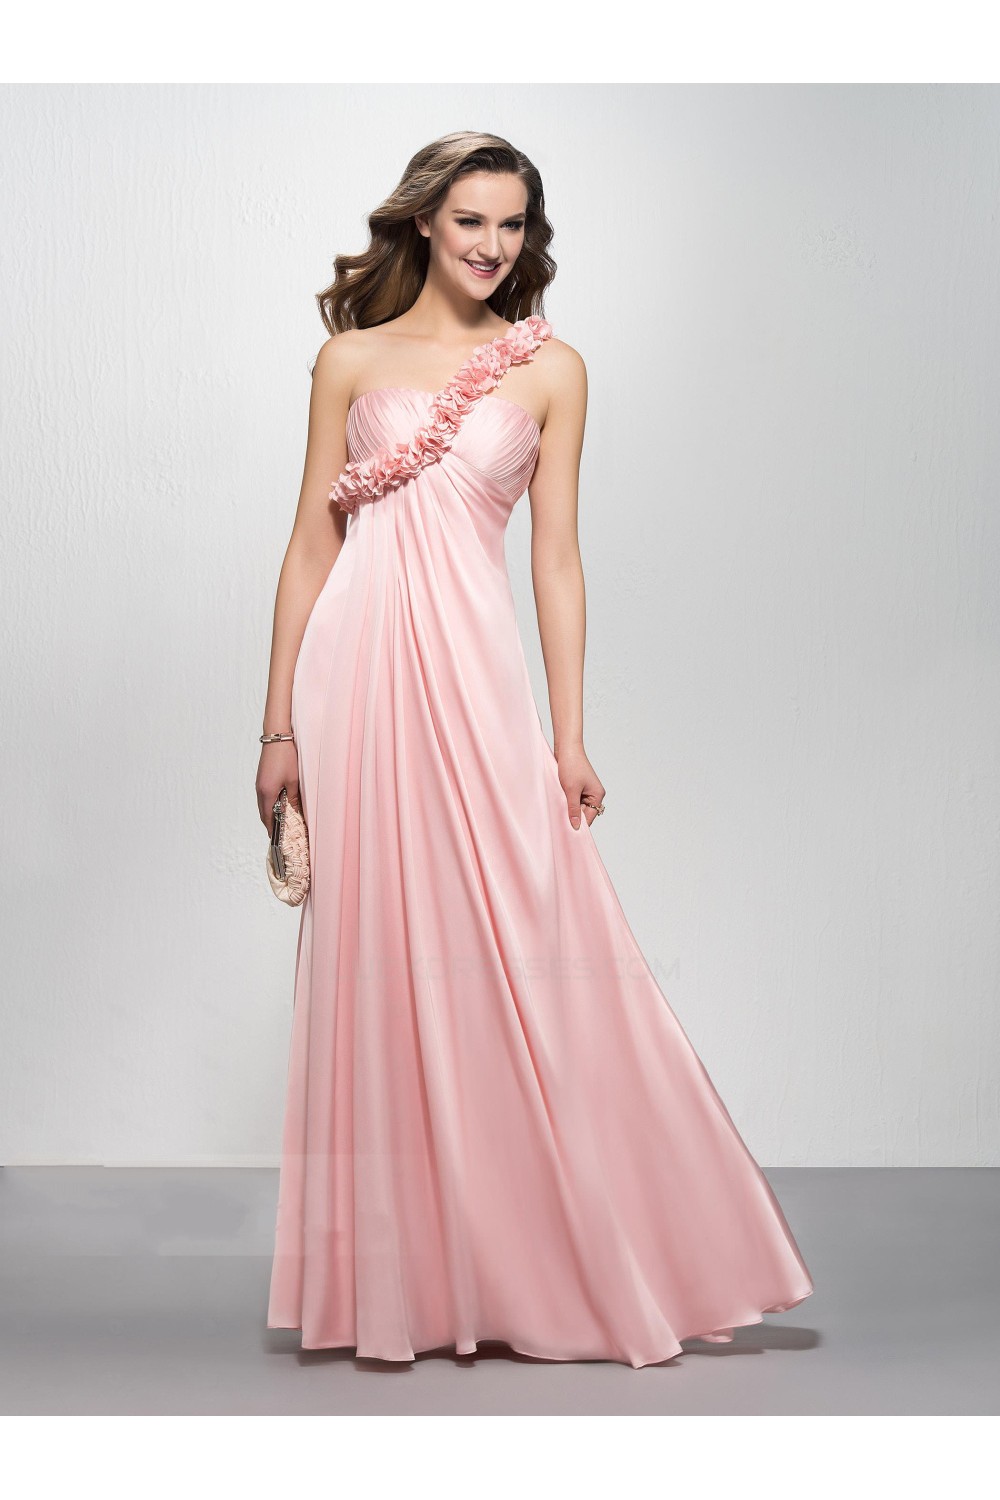 Empire One-Shoulder Long Pink Prom Evening Formal Party Dresses ...